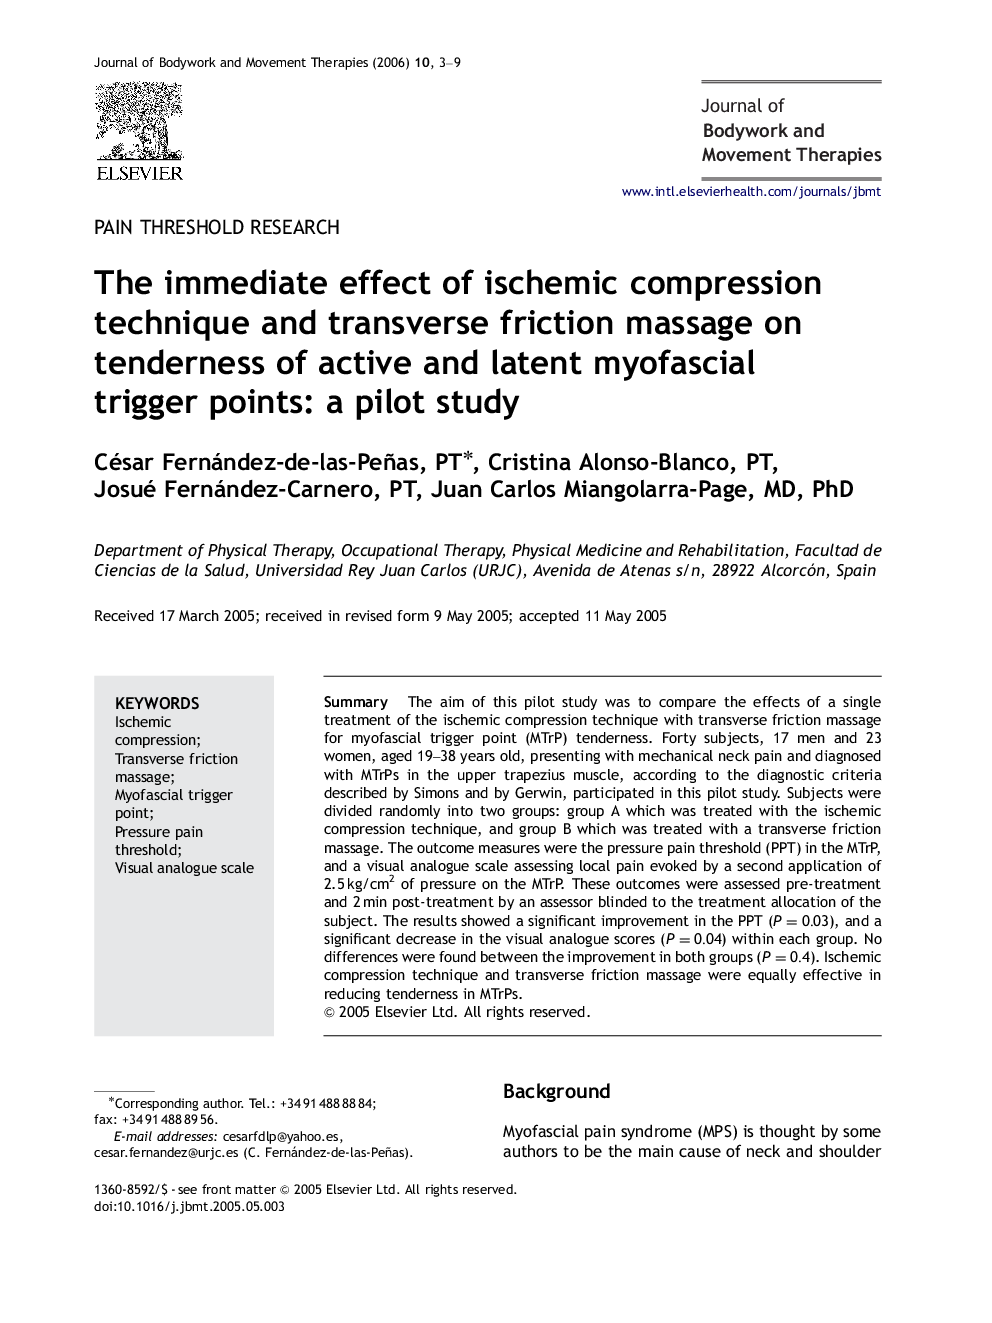 The immediate effect of ischemic compression technique and transverse friction massage on tenderness of active and latent myofascial trigger points: a pilot study